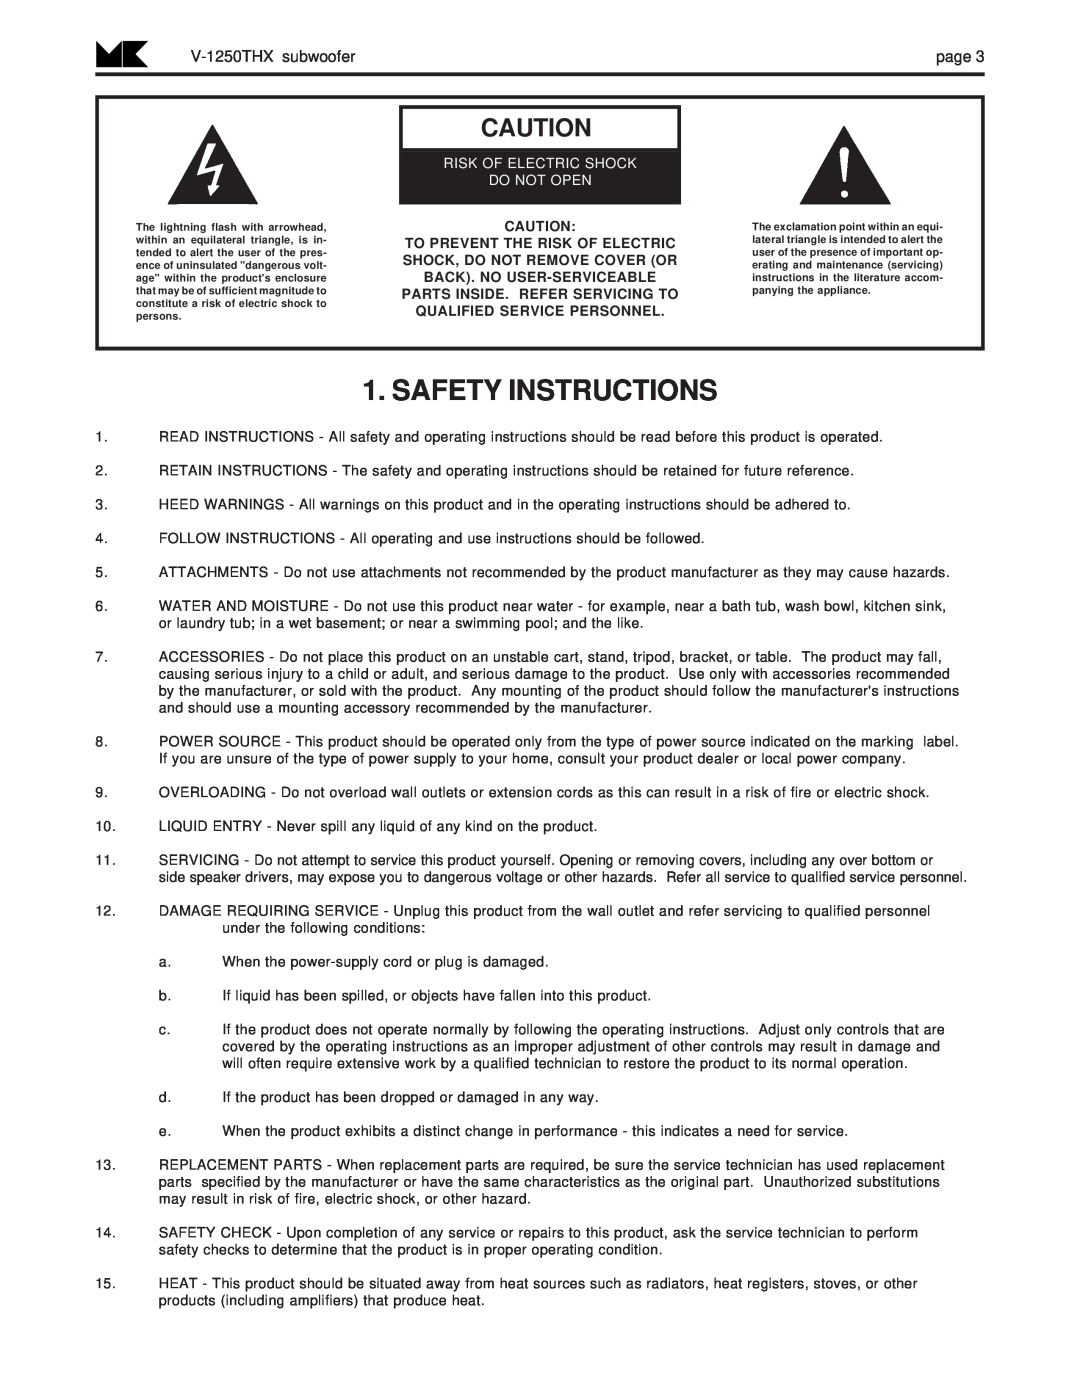 MK Sound Safety Instructions, V-1250THXsubwooferpage, Risk Of Electric Shock Do Not Open, Shock, Do Not Remove Cover Or 